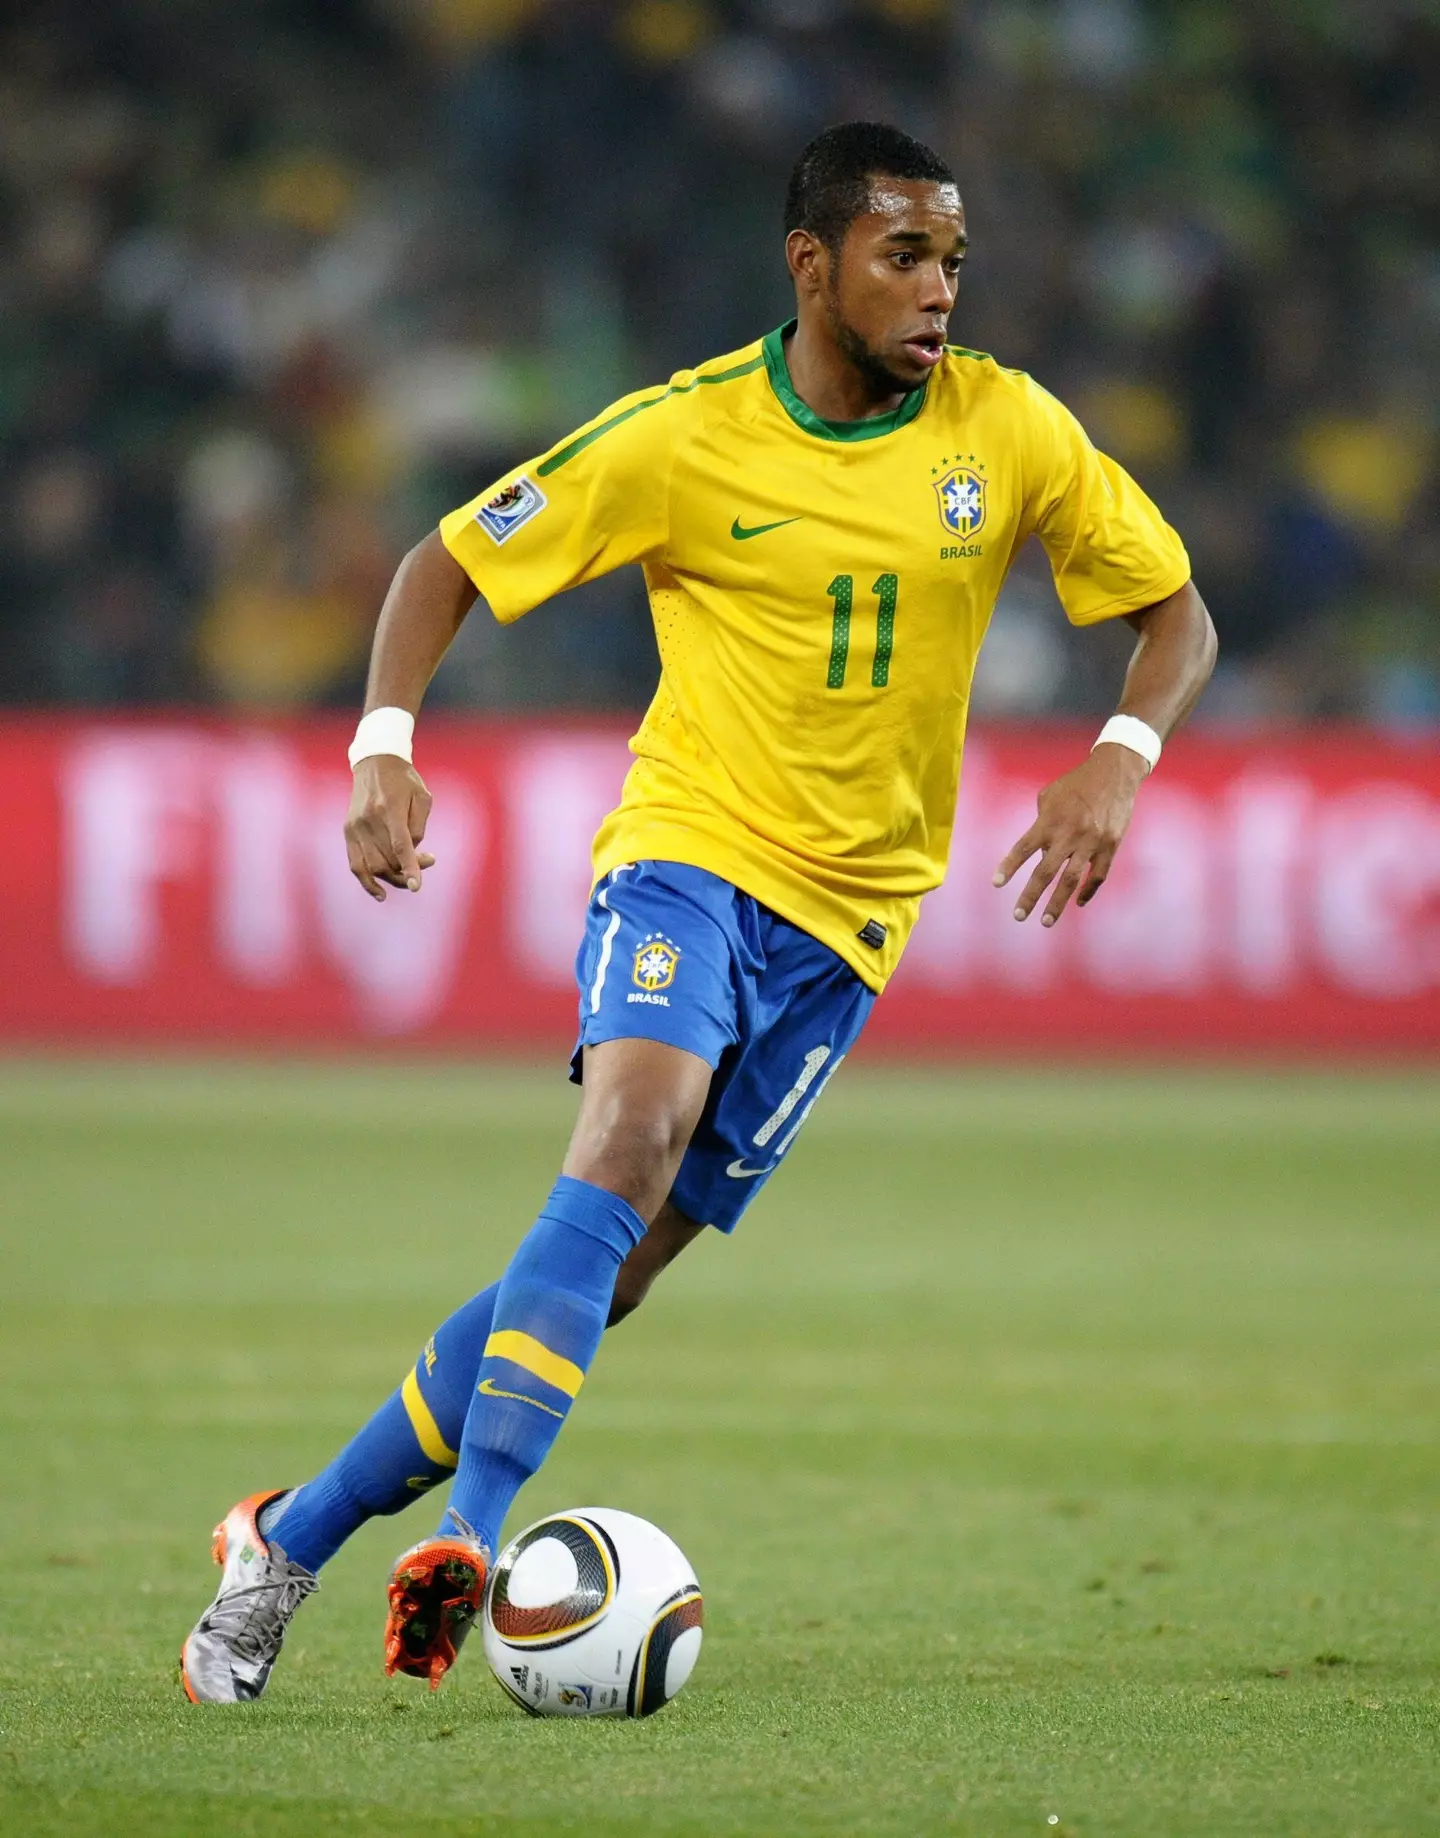 Robinho won 100 caps for Brazil during his playing career (Image: Alamy)